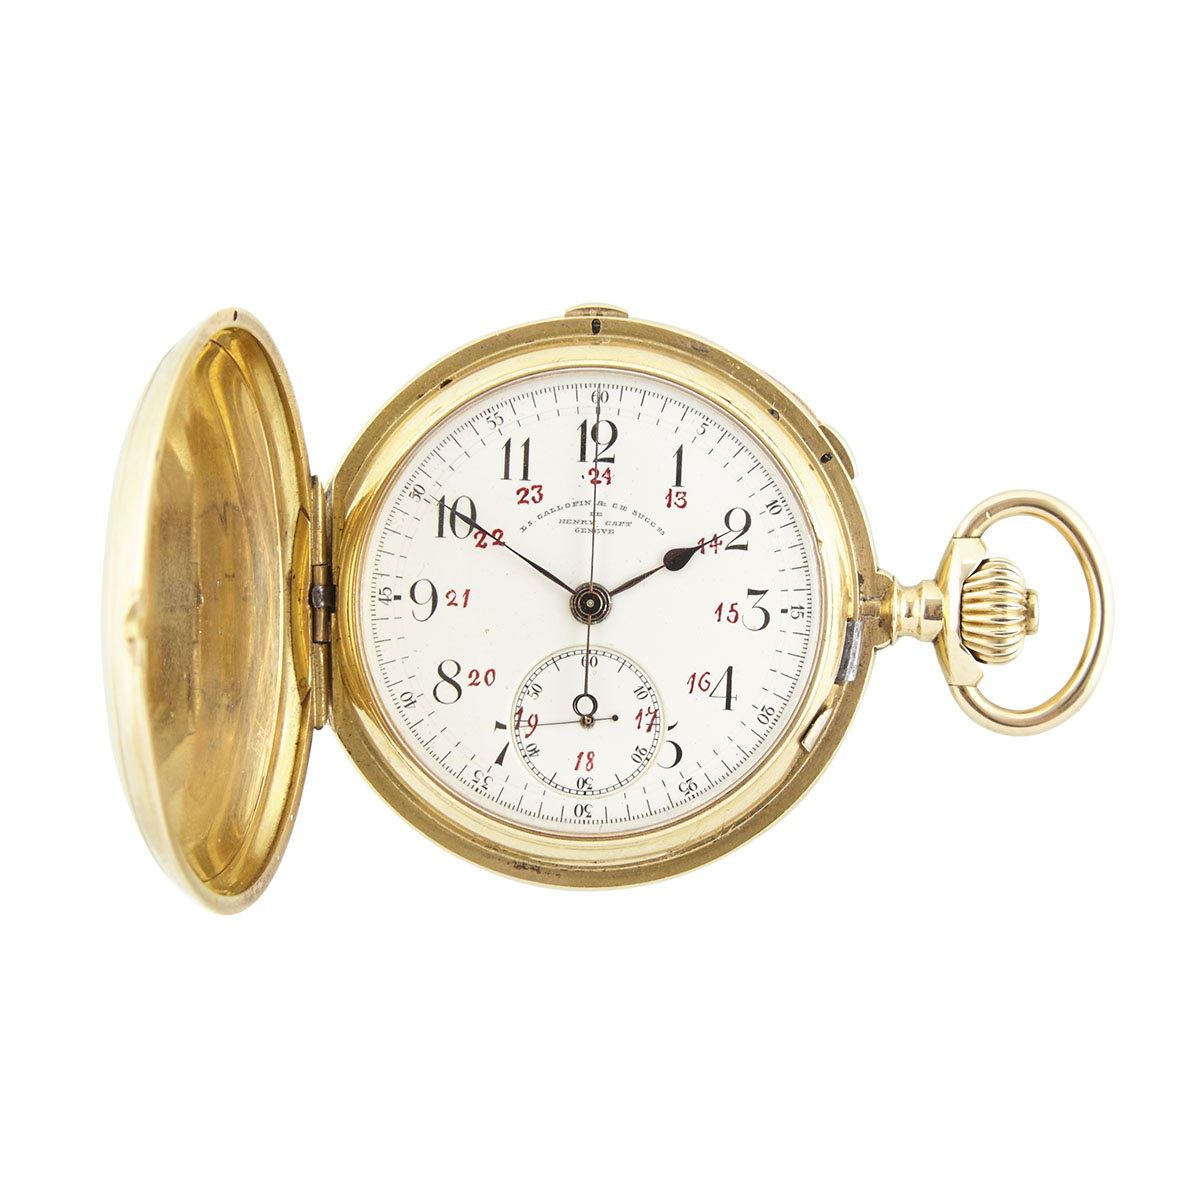 L. Gallopin & Cie, Successor De Henry Capt Stemwind Pocket Watch With Rattrapante Chronograph